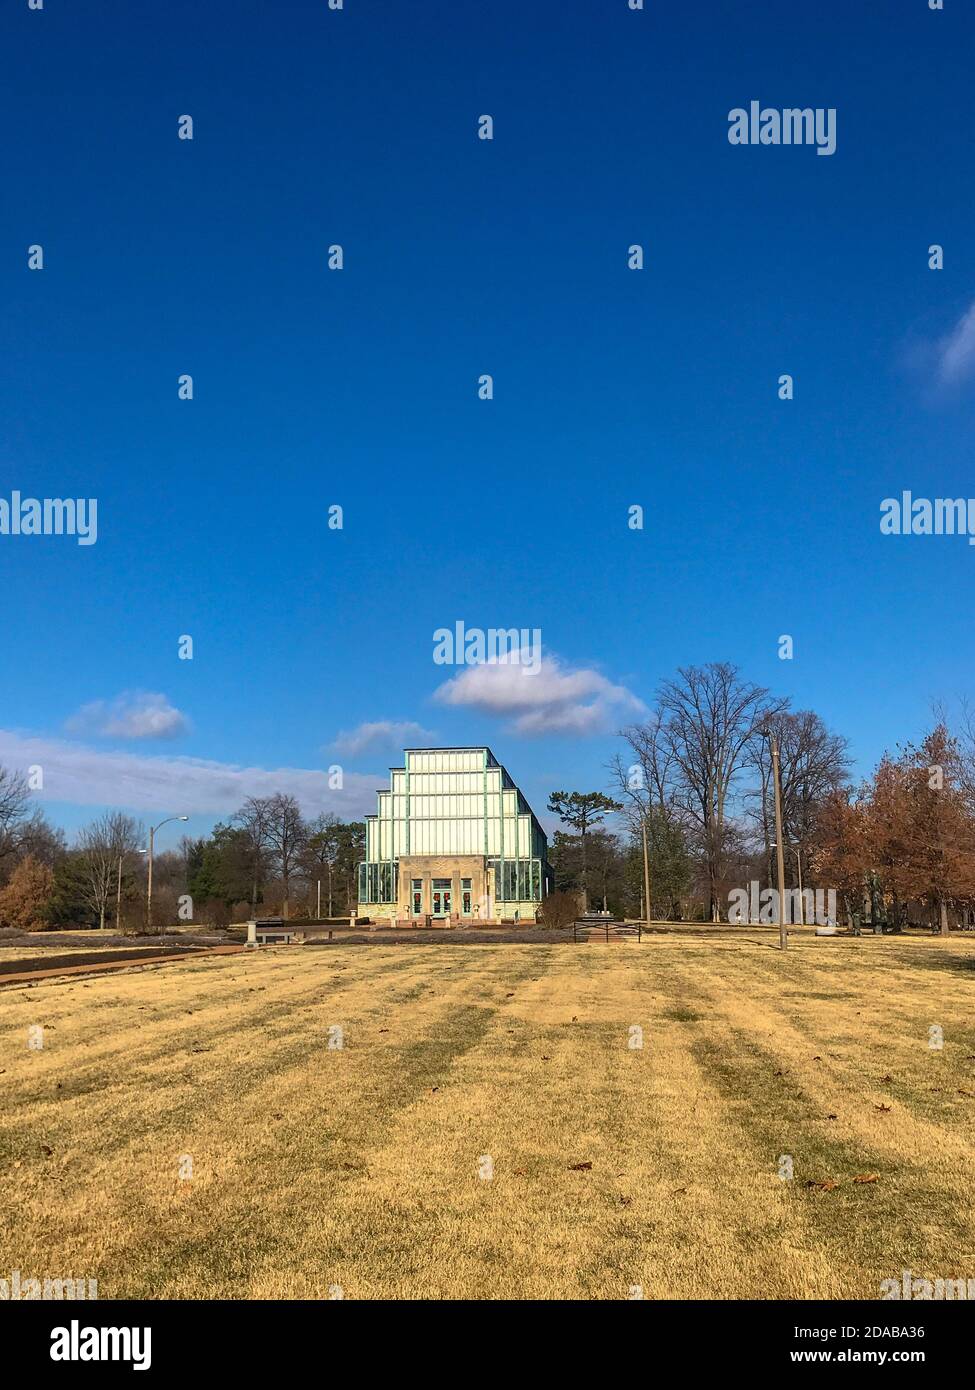 Saint Louis, MO--Dec 22, 2018; View of Jewel Box green house and botanical garden in Forest park with blue sky and field in foreground in winter Stock Photo